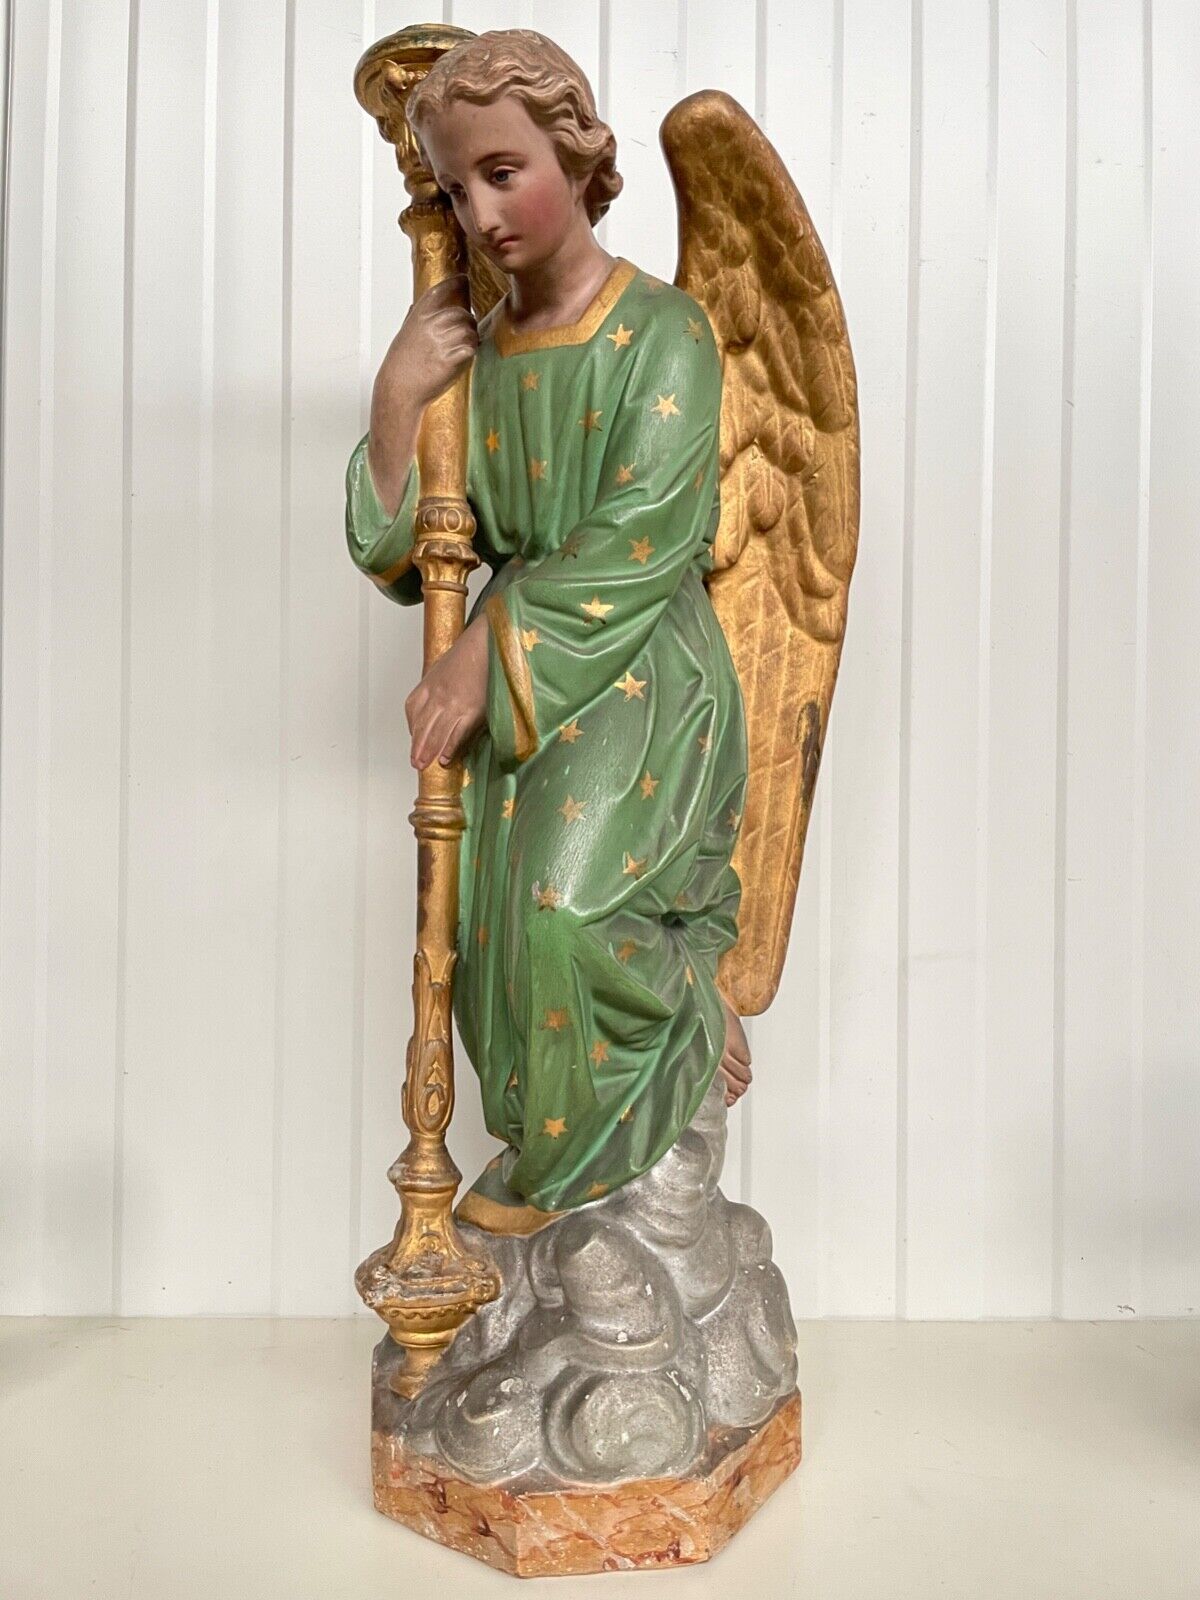 SALE An Exceptional Large Gothic Revival Angel holding a candlestick 27.362 inch